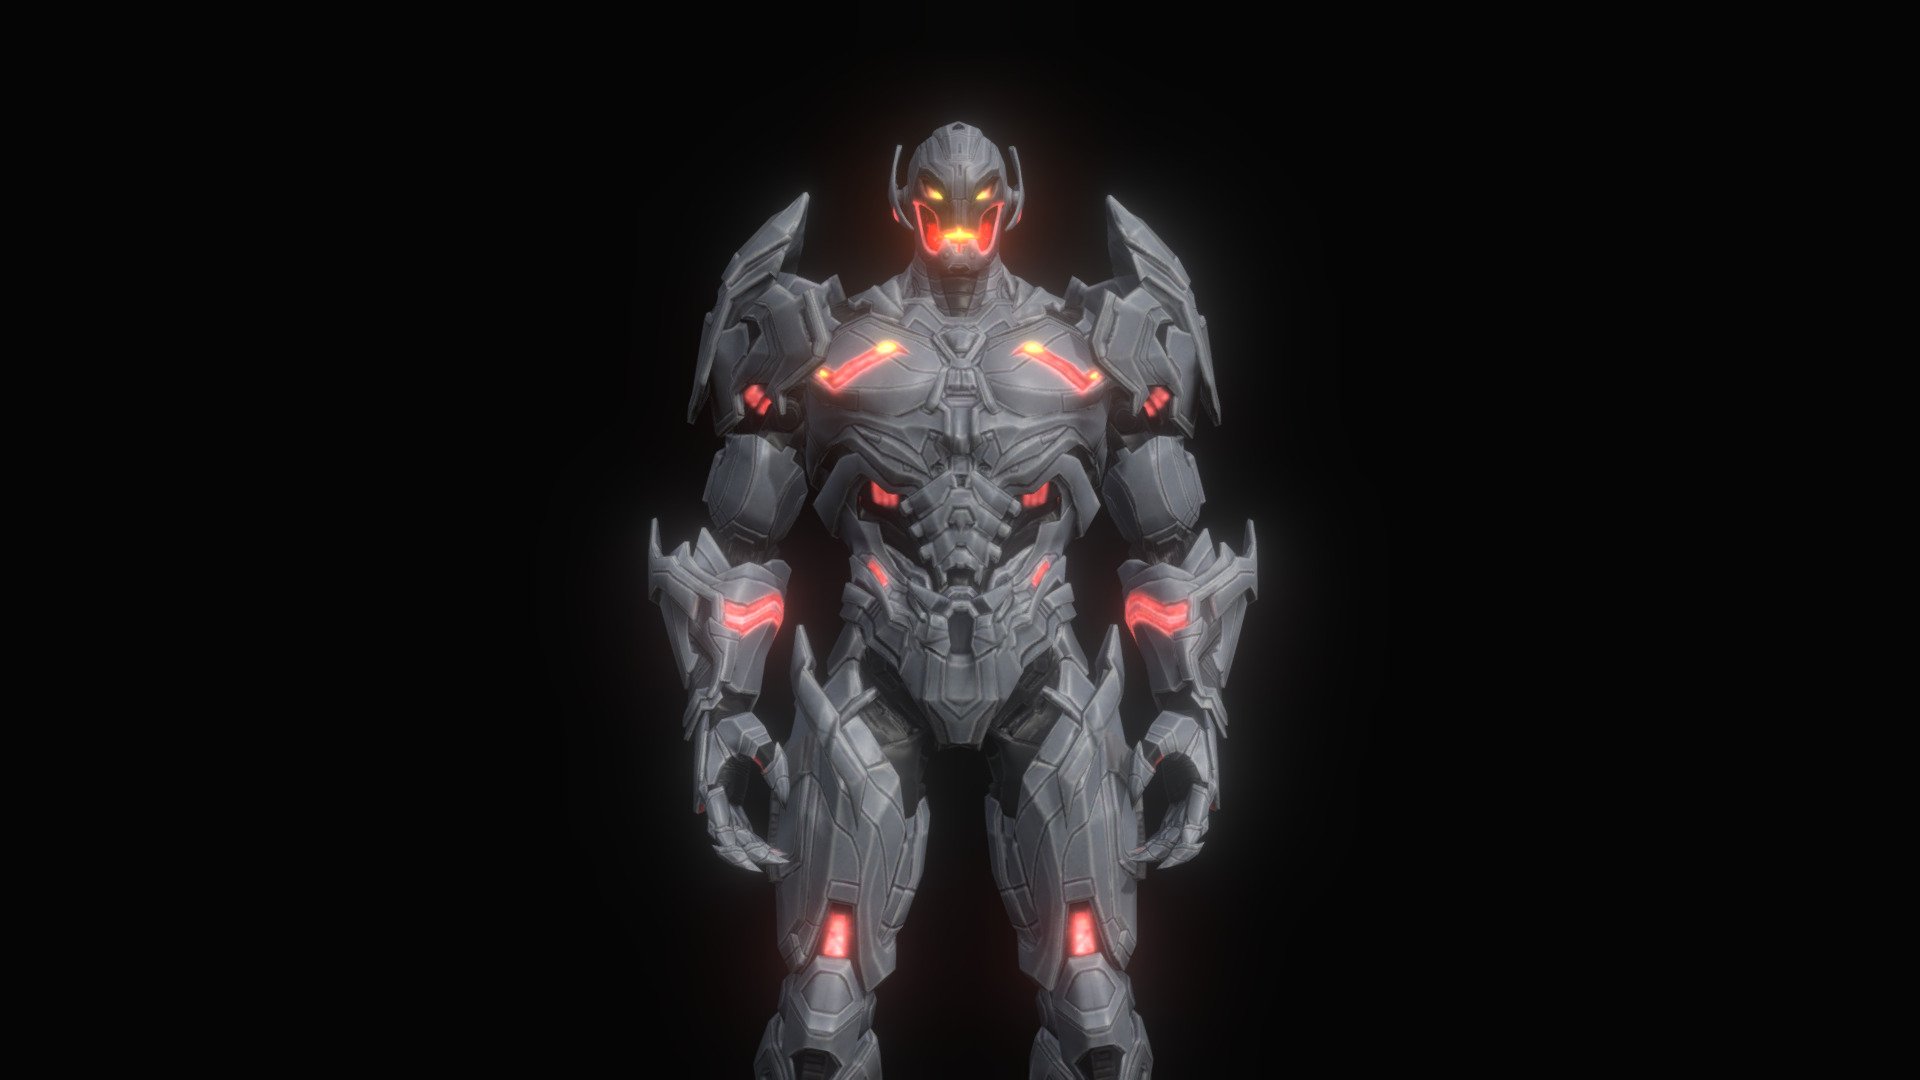 Ultron (/ˈʌltrɒn/) is a supervillain appearing in American comic books published by Marvel Comics. The character was created by writer Roy Thomas and artist John Buscema, and initially made his debut as an unnamed character in The Avengers #54 (July 1968), with his first full appearance in The Avengers #55 (August 1968). He is a self-aware and highly intelligent robot who develops a god complex and a grudge against his creator Hank Pym. His goal to destroy humanity has brought him into repeated conflict with the Avengers 3d model